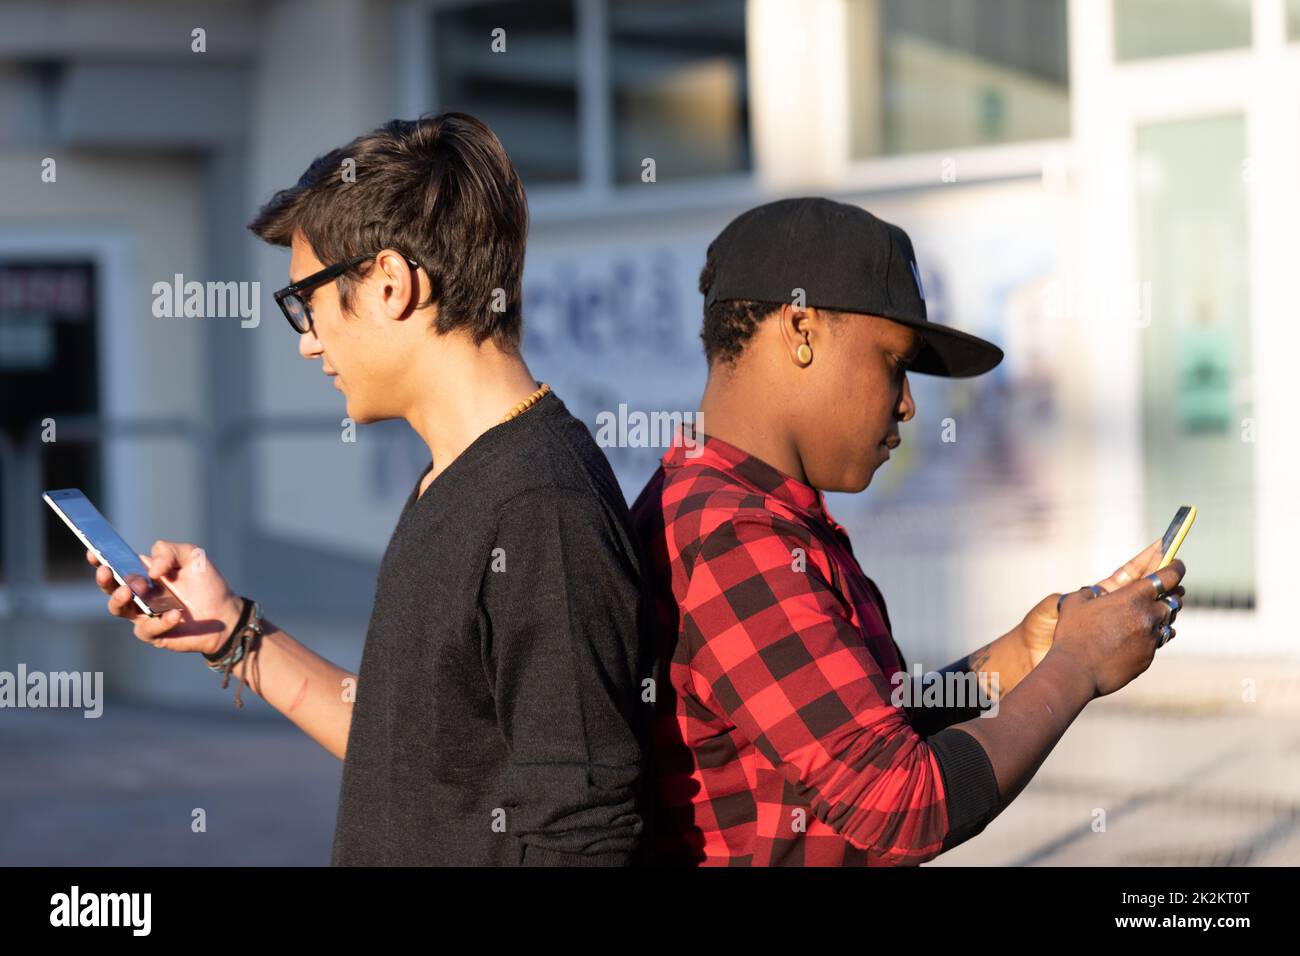 white guy and black guy ignoring each other Stock Photo